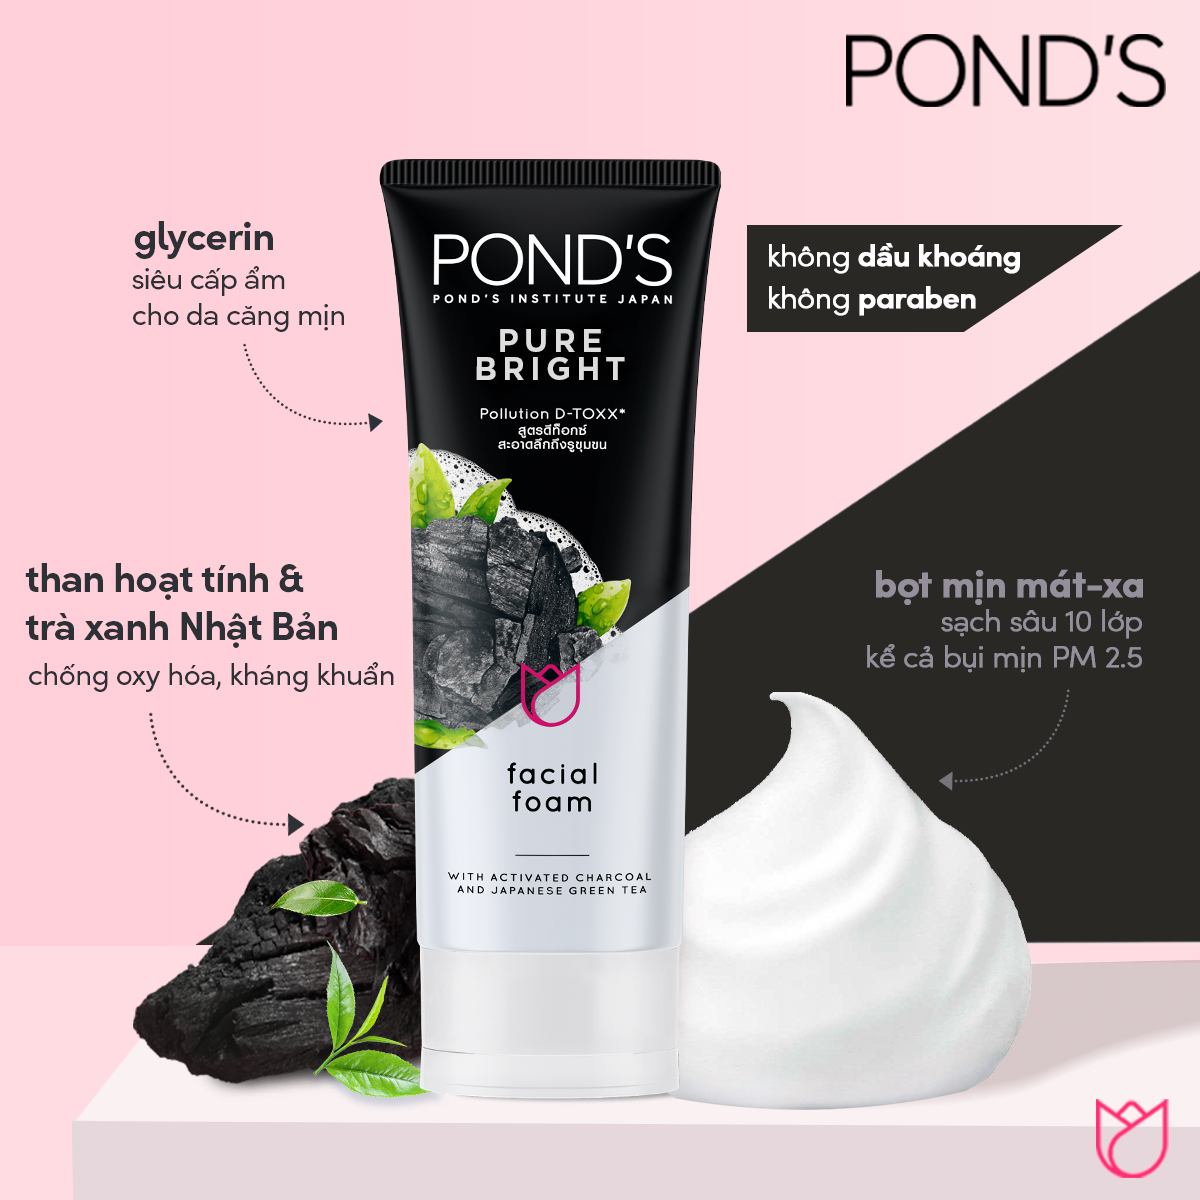 Pond's Pure Bright Deep Cleansing Facial Foam